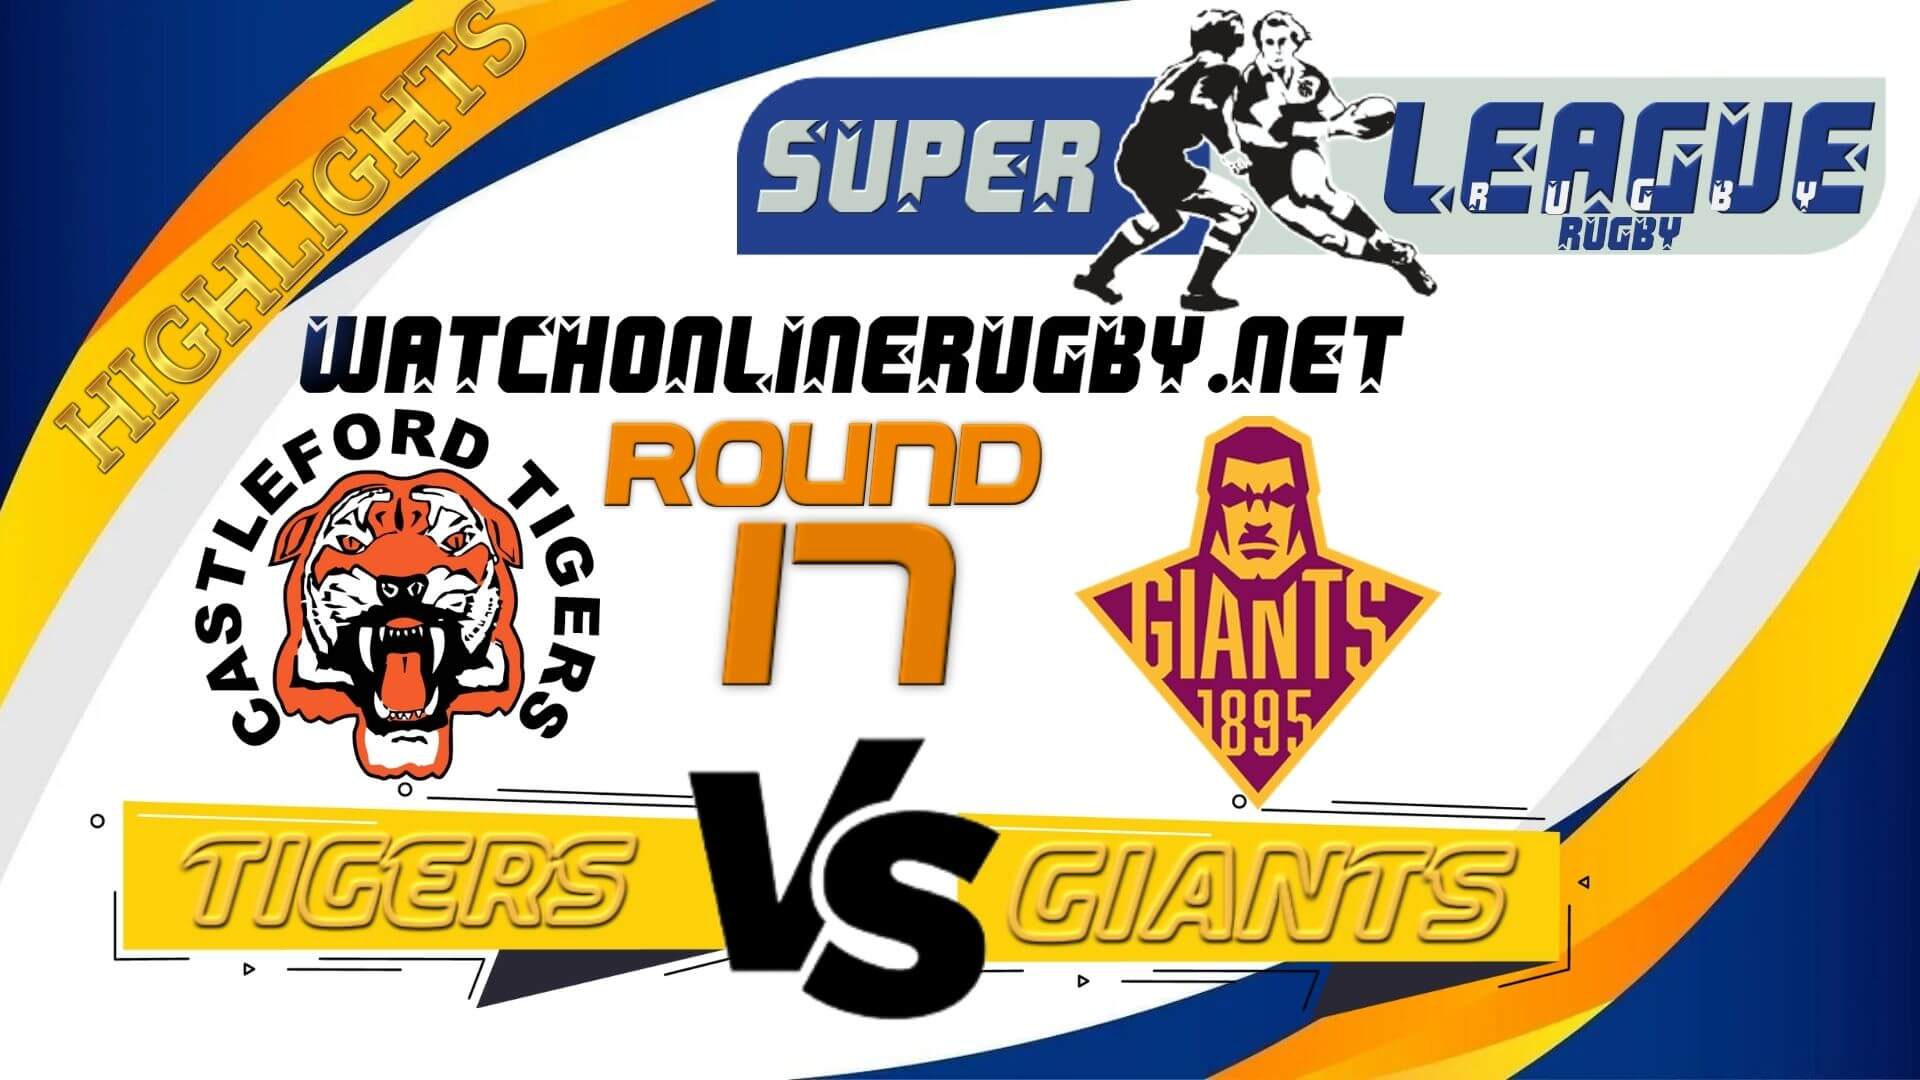 Castleford Tigers Vs Huddersfield Giants Super League Rugby 2022 RD 17